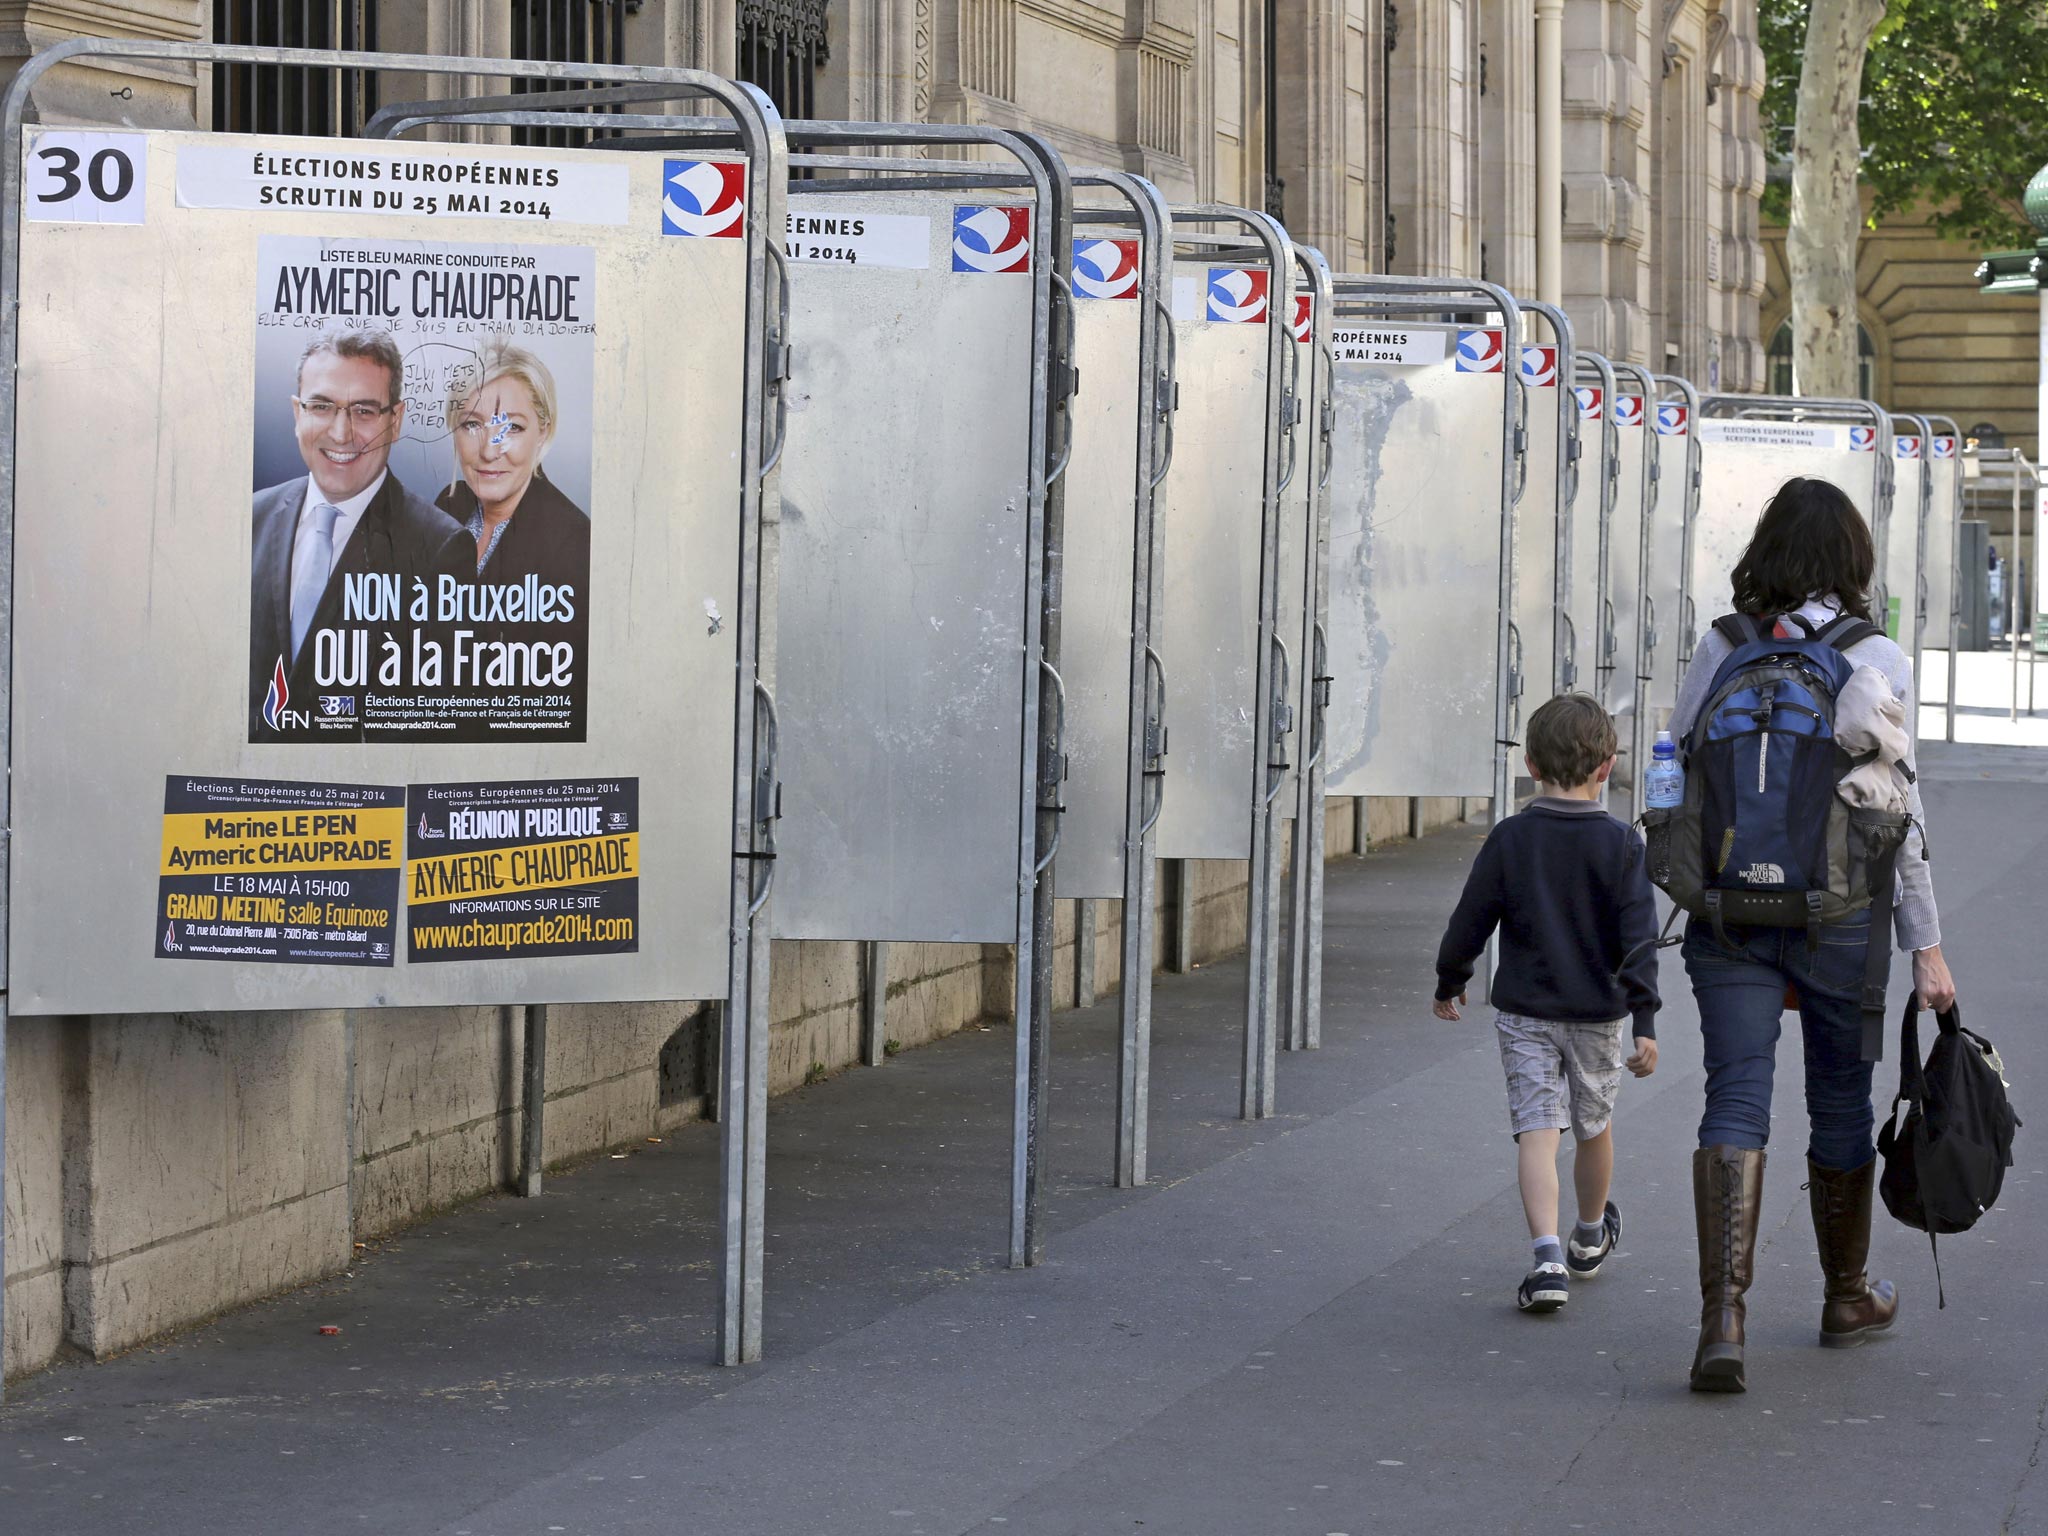 A woman walks past electoral boards for the upcoming European elections in Paris